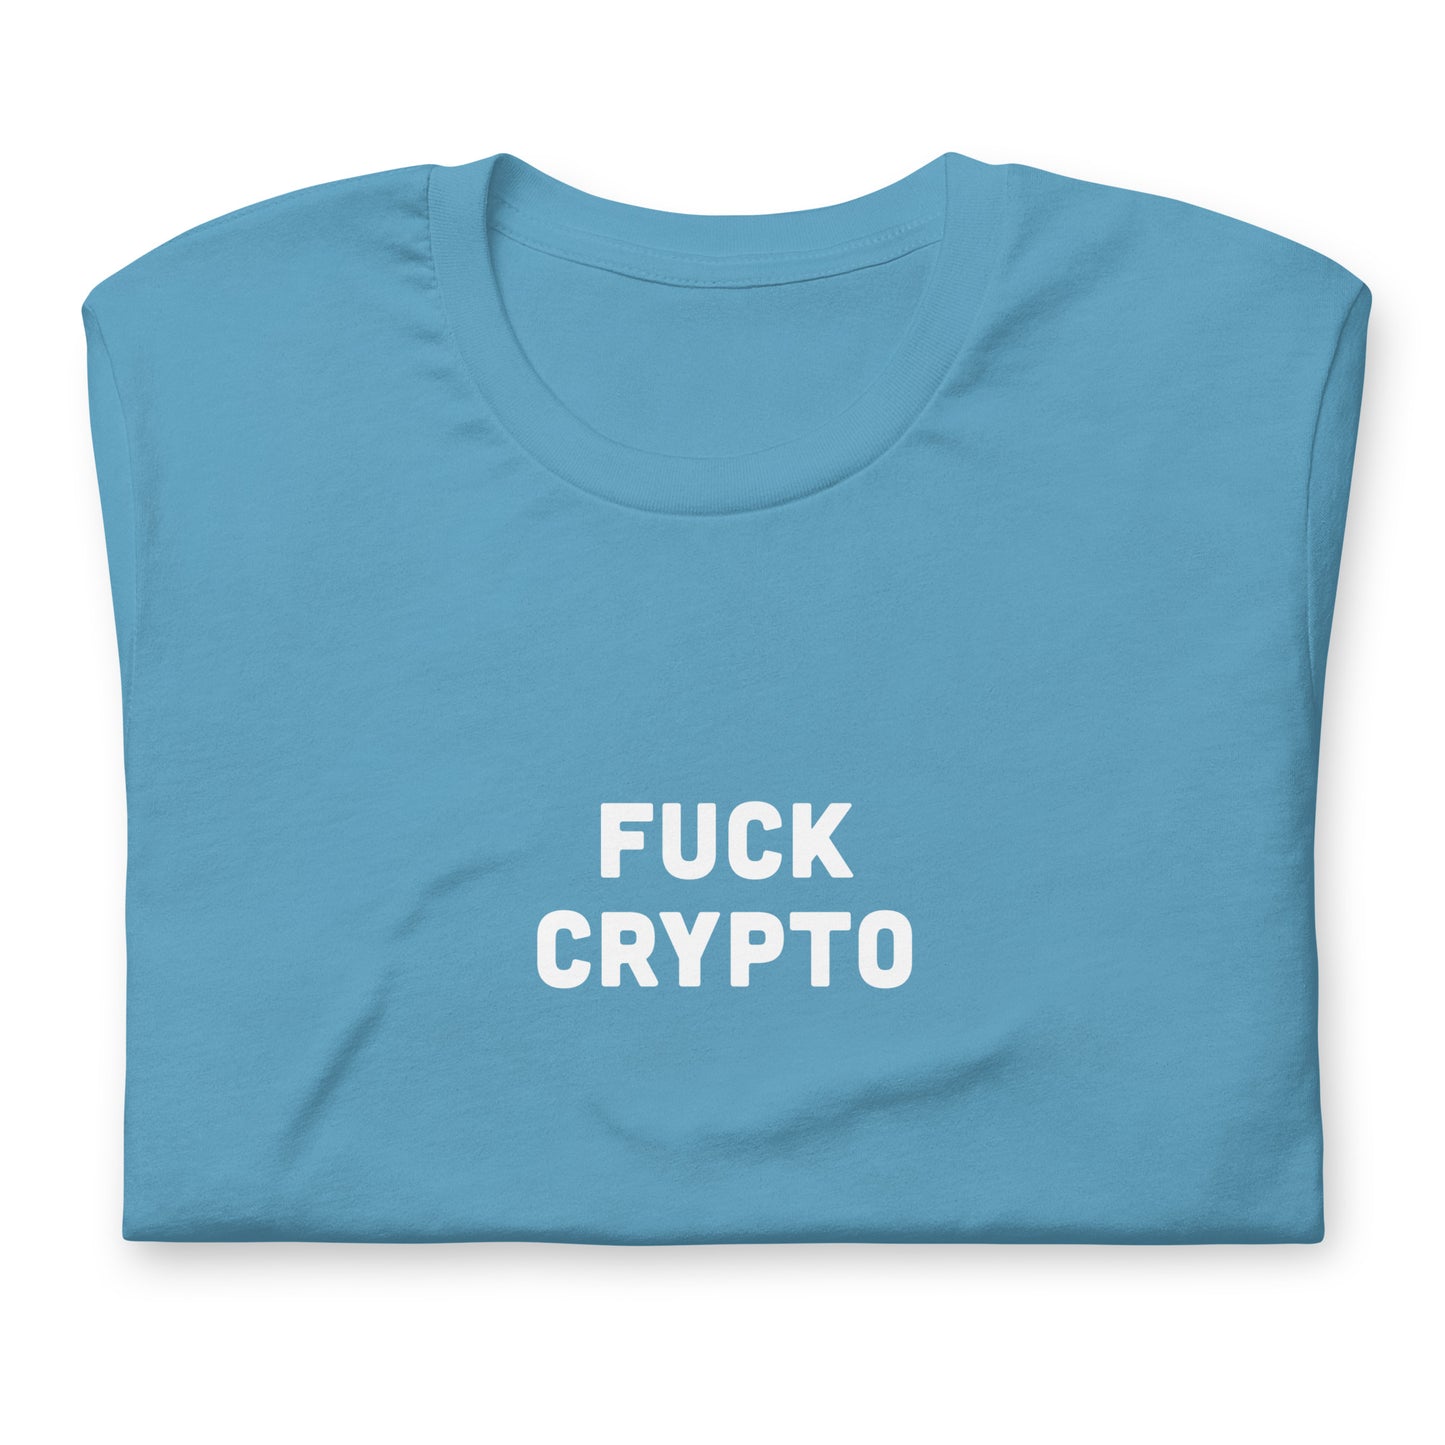 Fuck Crypto T-Shirt Size S Color Black